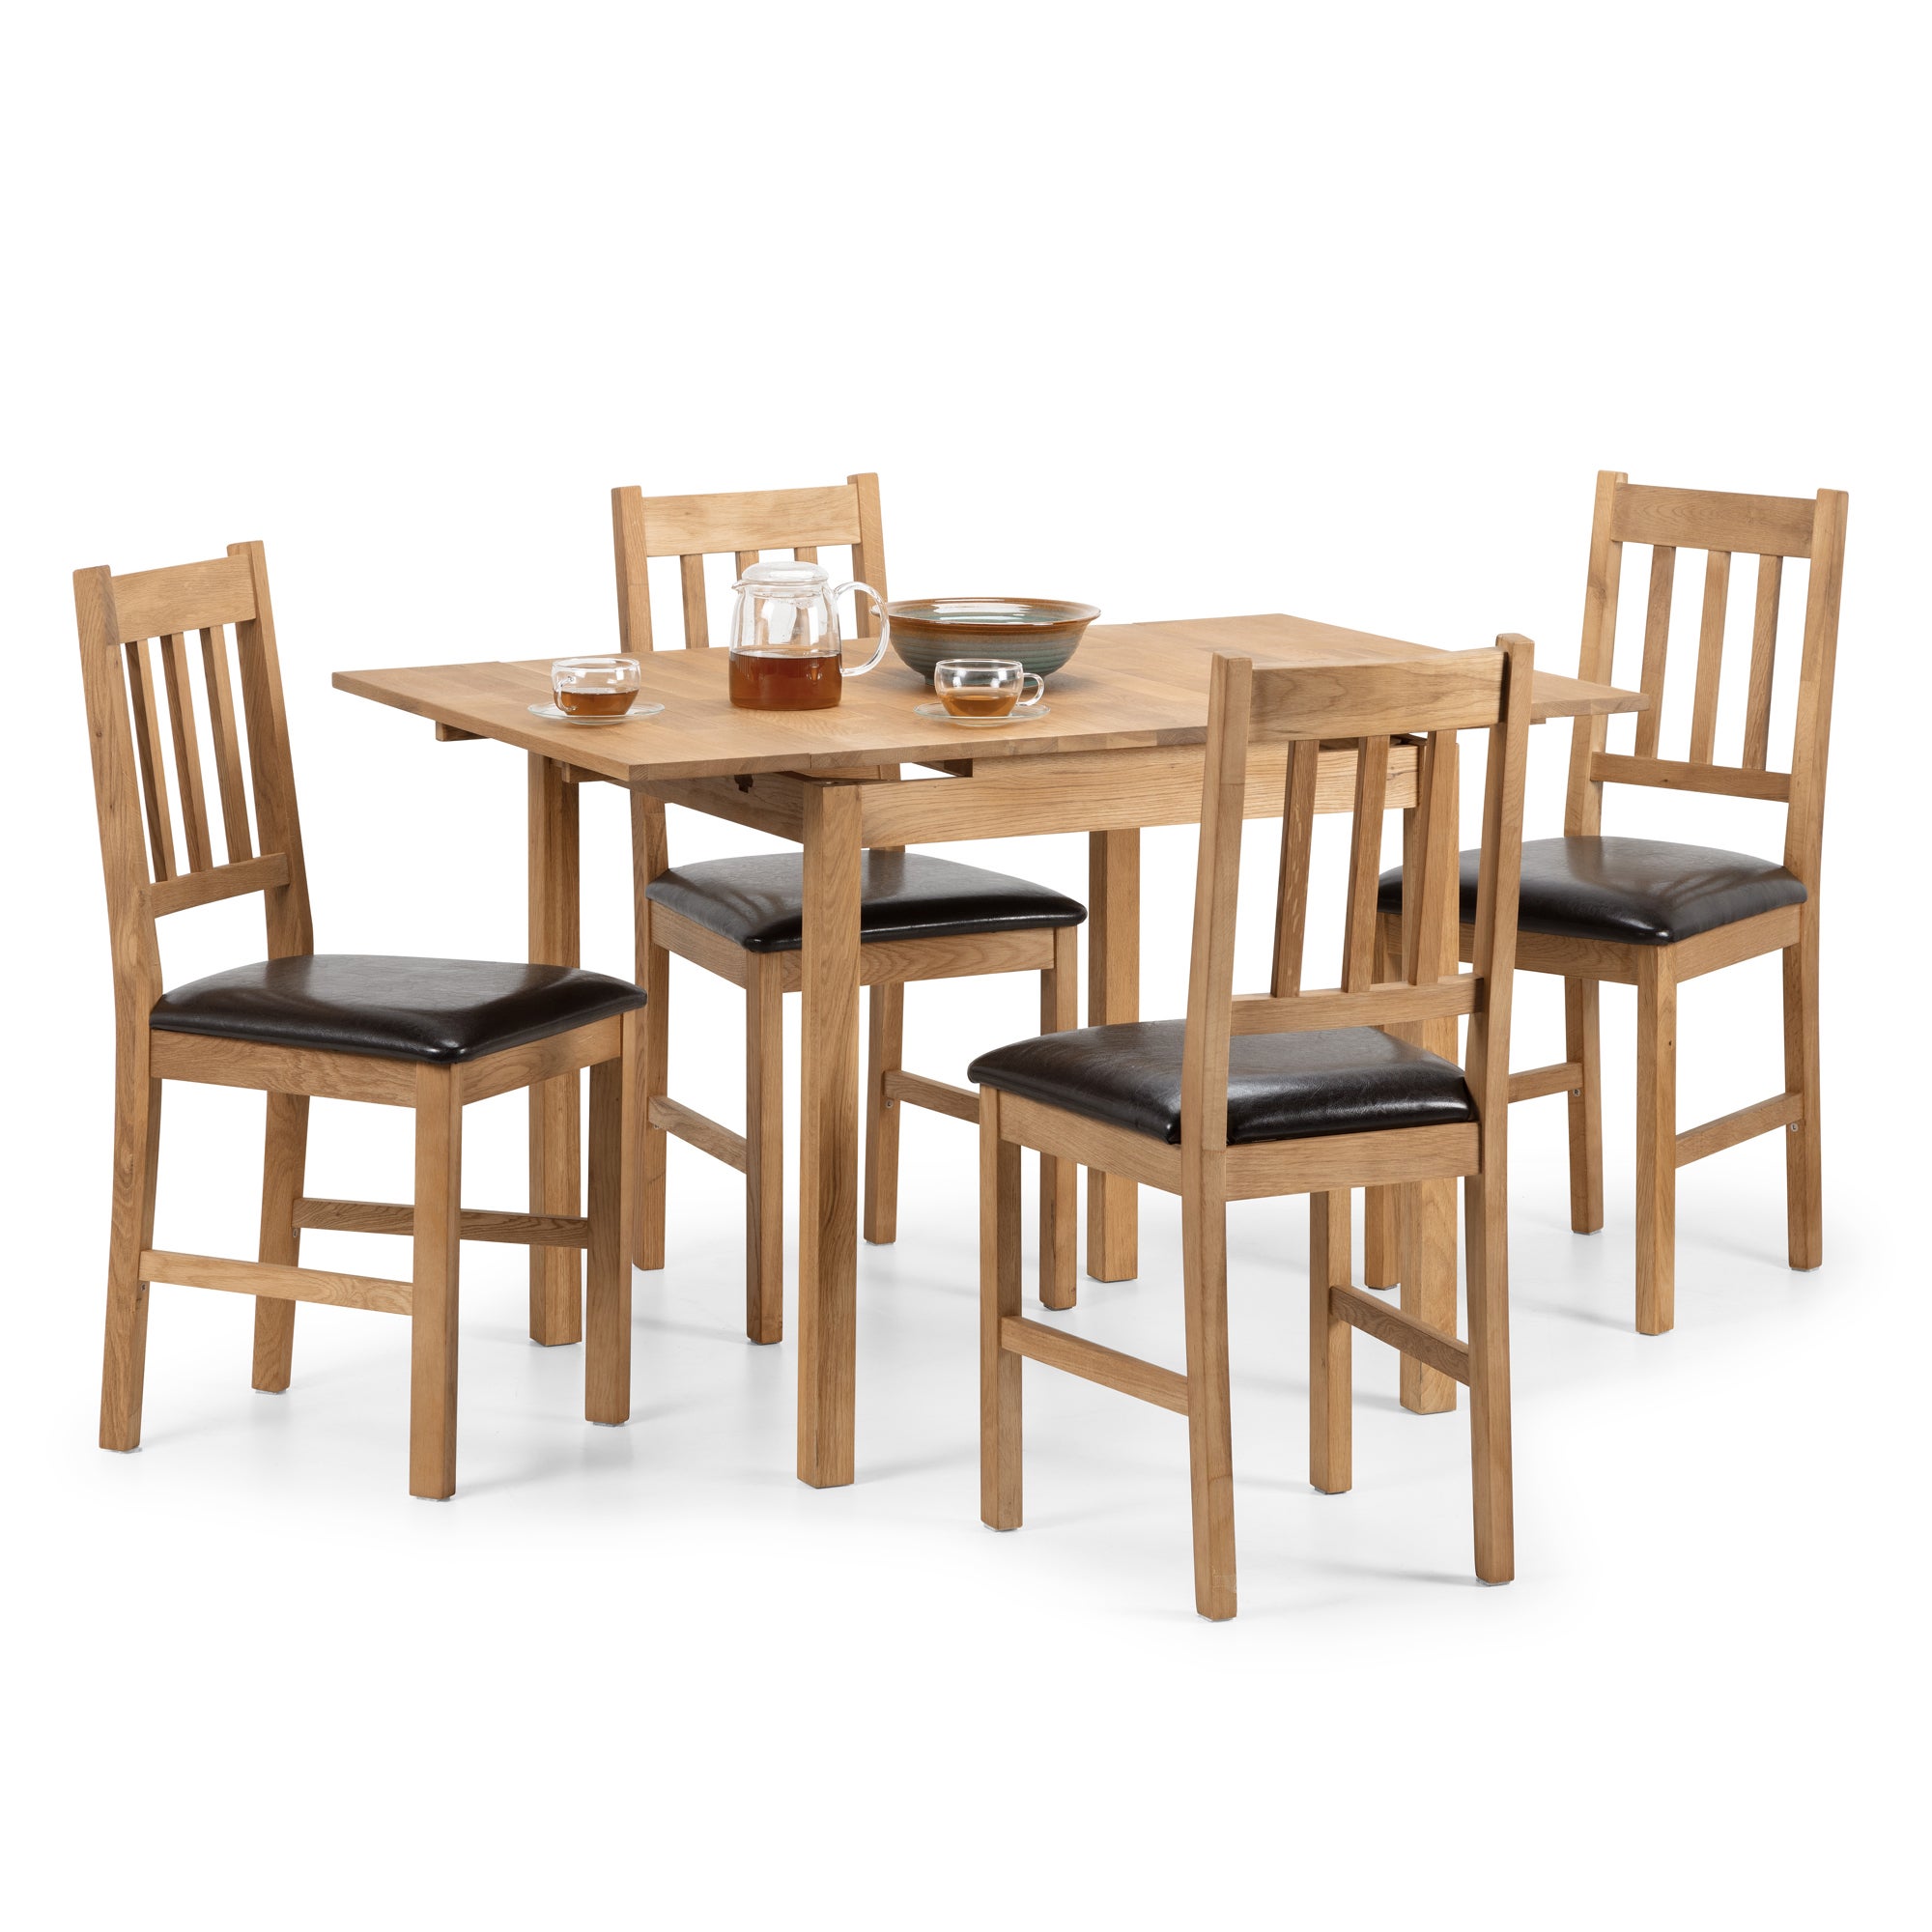 Coxmoor Square Extendable Dining Table with 4 Chairs, Solid Oak Brown